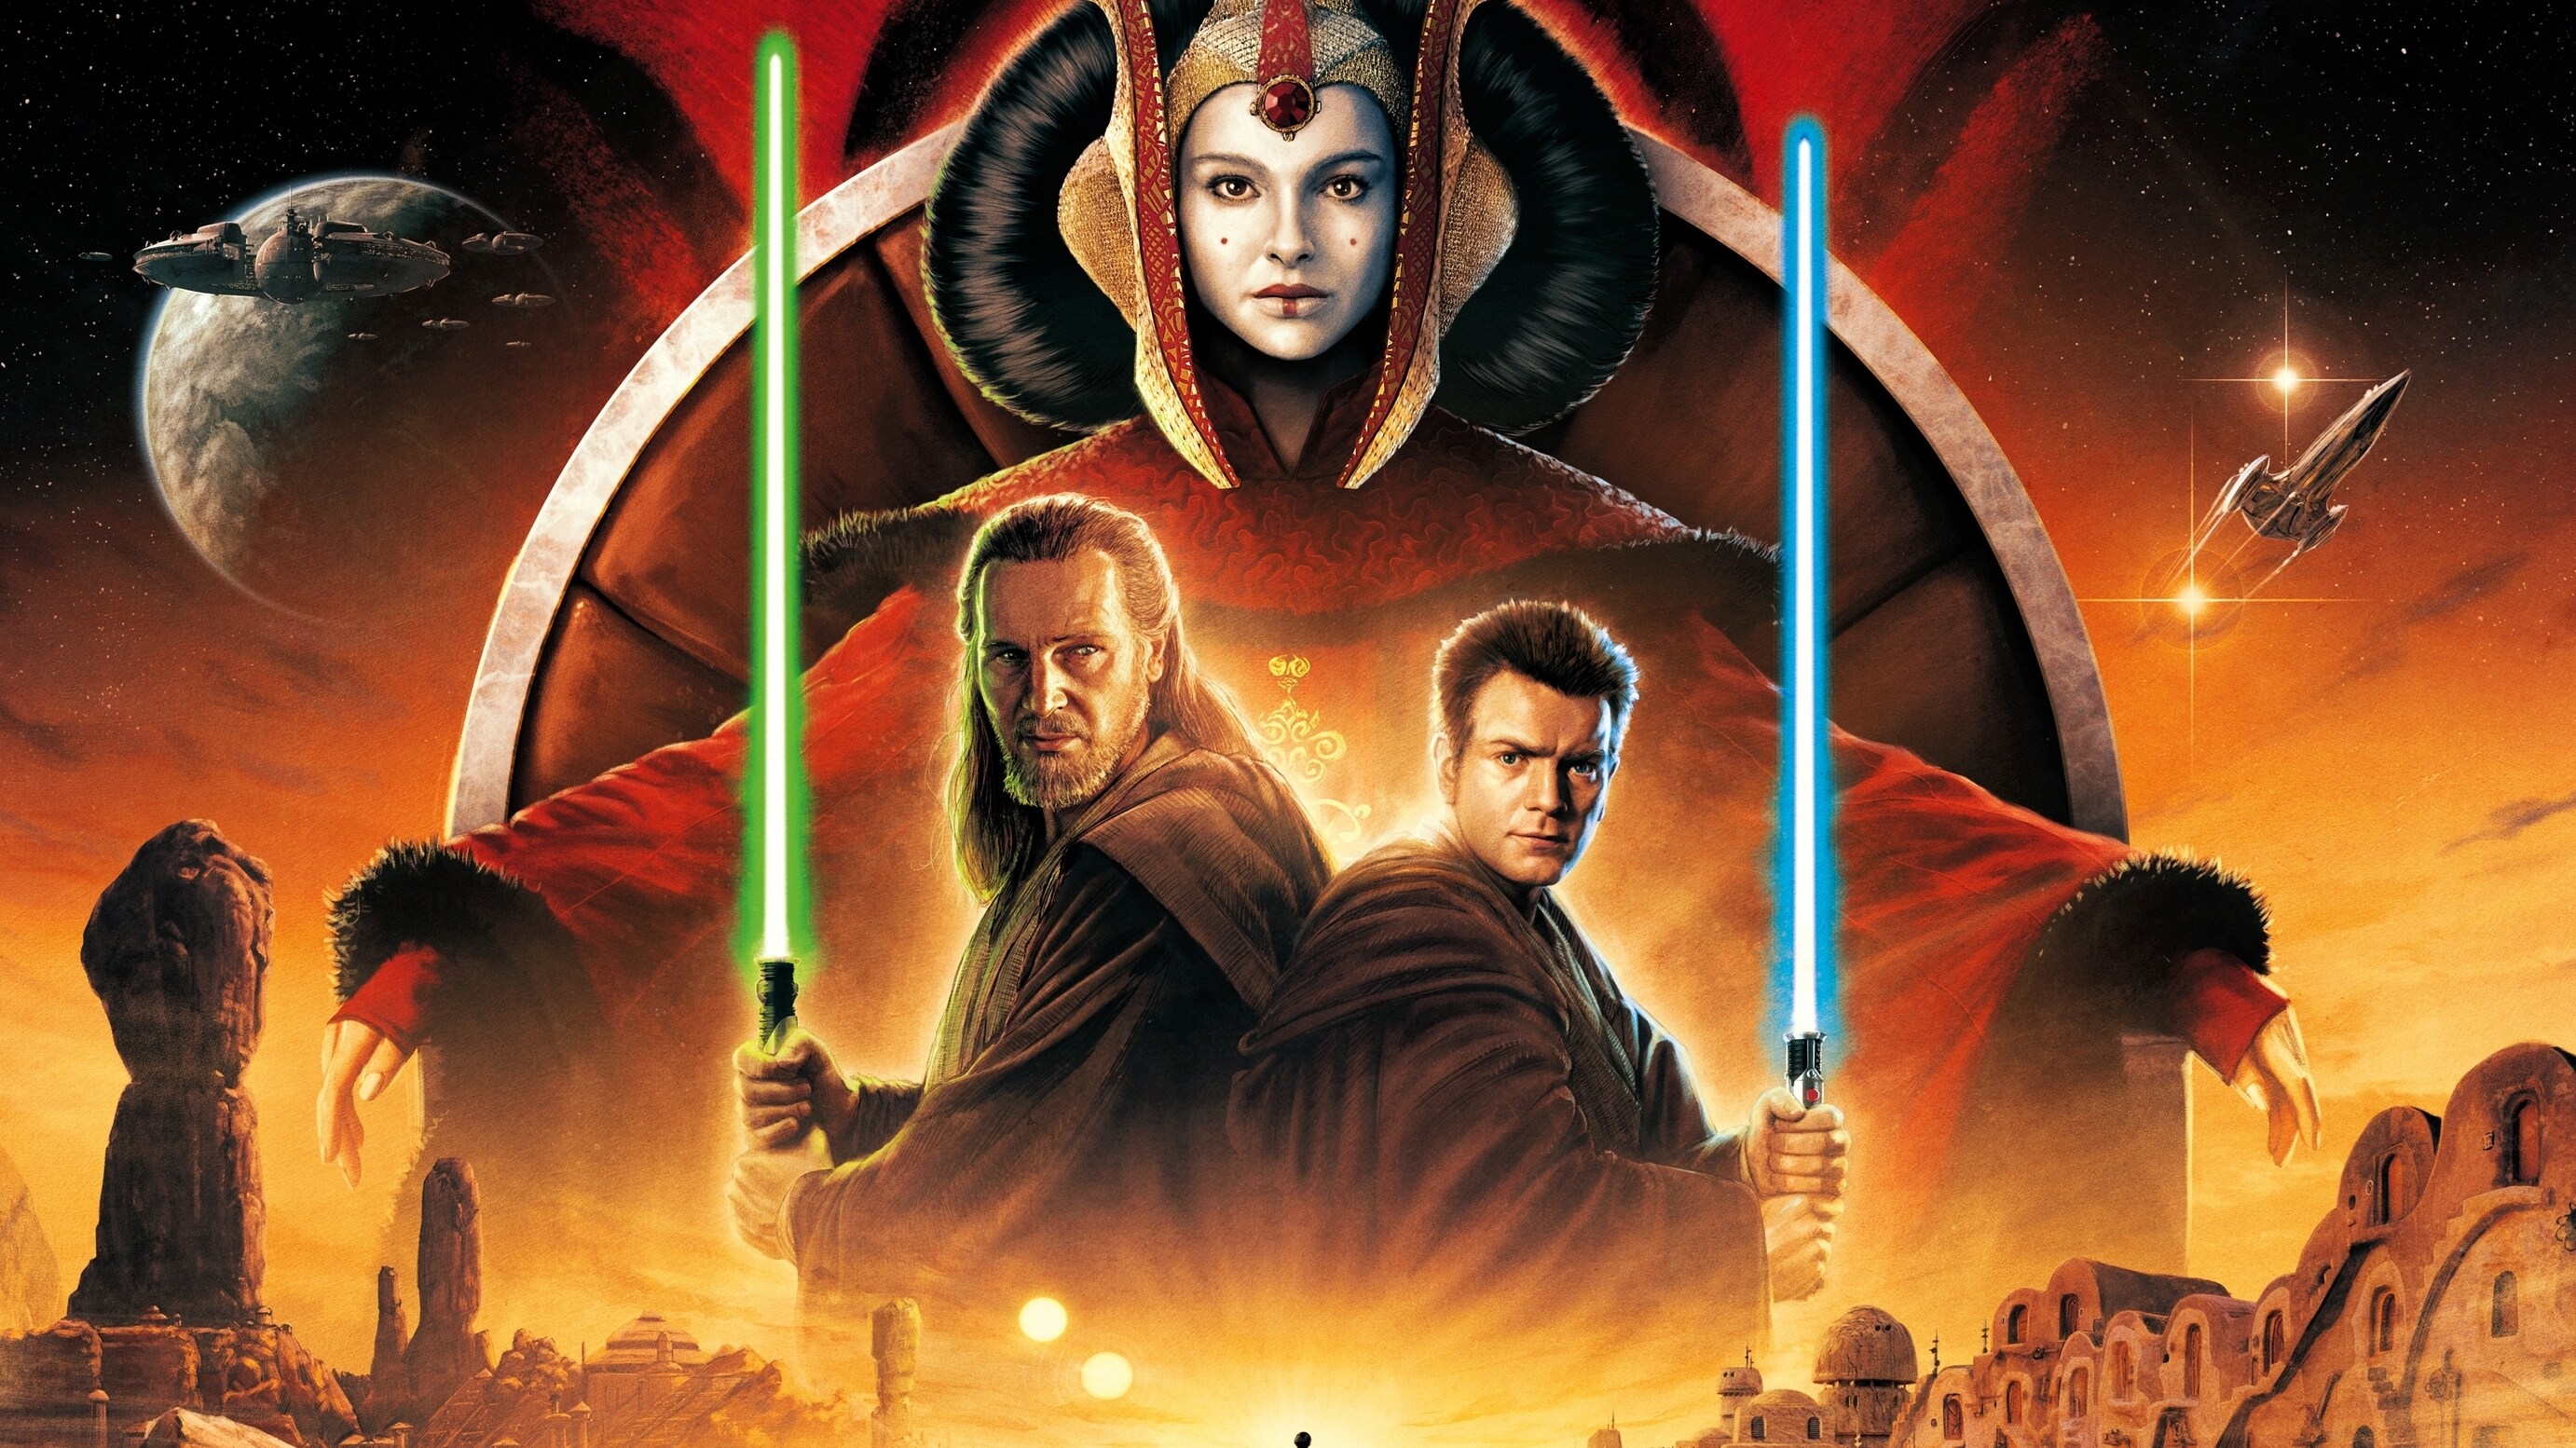 LUCASFILM CELEBRATES 25TH ANNIVERSARY OF “STAR WARS: THE PHANTOM MENACE” WITH THEATRICAL RE-RELEASE TICKETS ON SALE NOW FOR IN-CINEMA SCREENINGS BEGINNING MAY 3